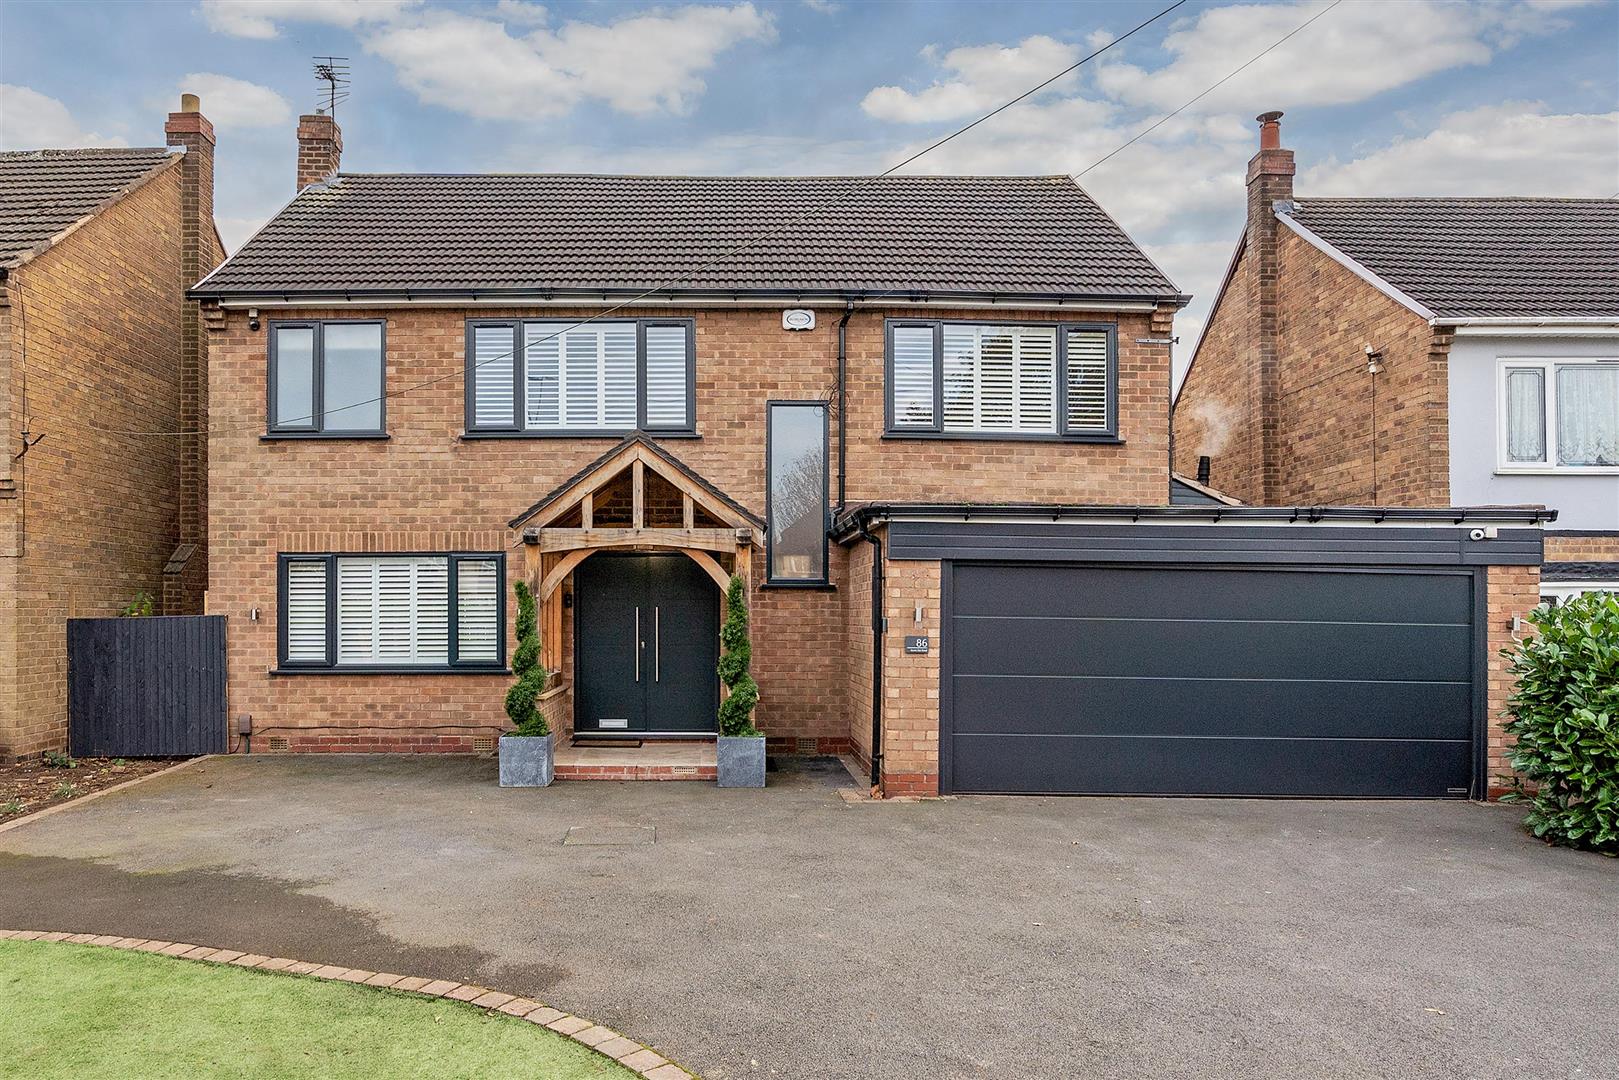 4 bed detached house for sale in Seven Star Road, Solihull 0